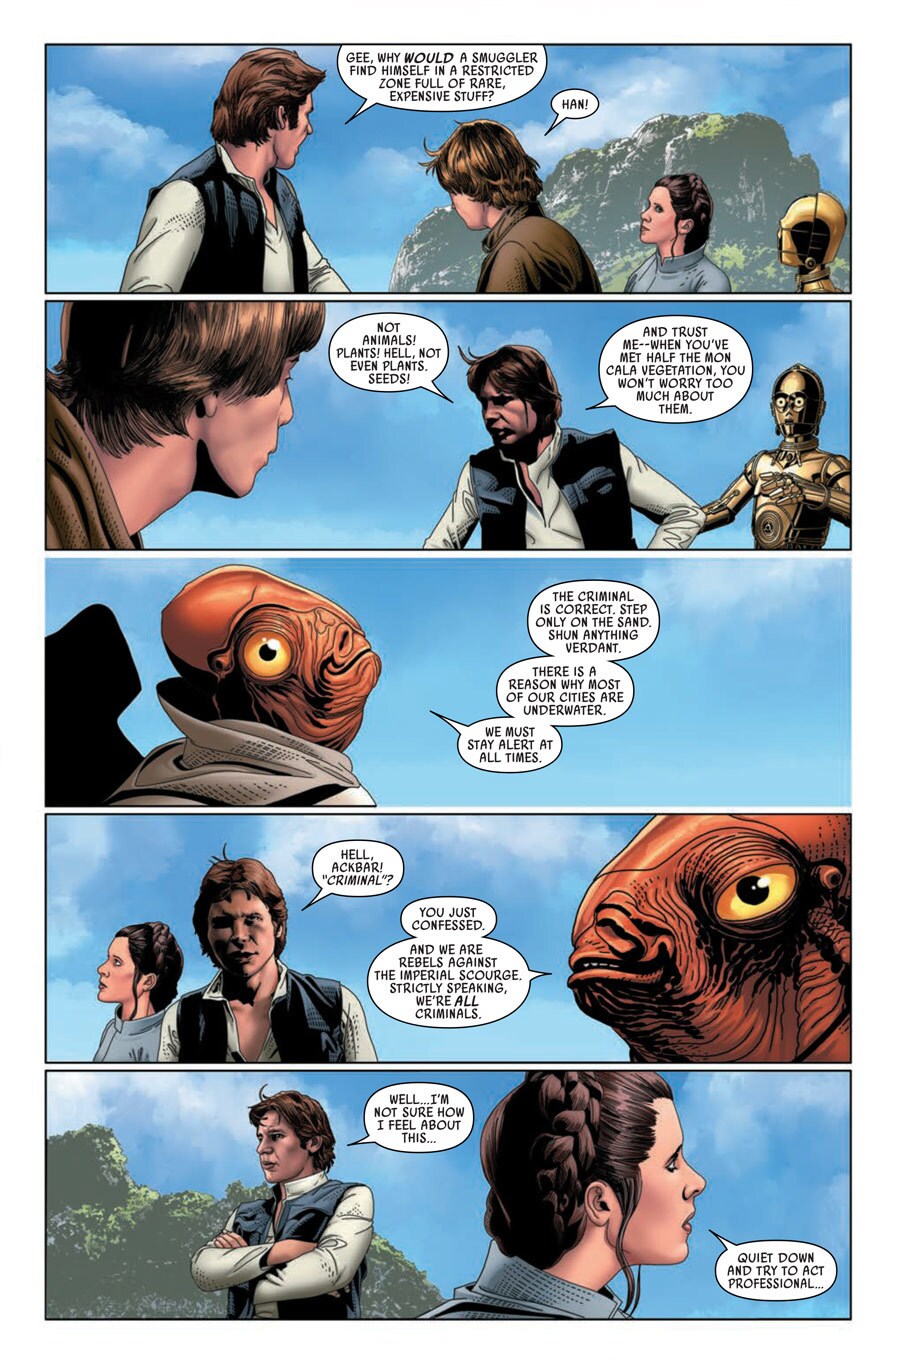 A page from Marvel's Star Wars comic book series shows Han complaining about the conditions on Mon Cala to Luke, Leia, C-3PO, and Admiral Ackbar.